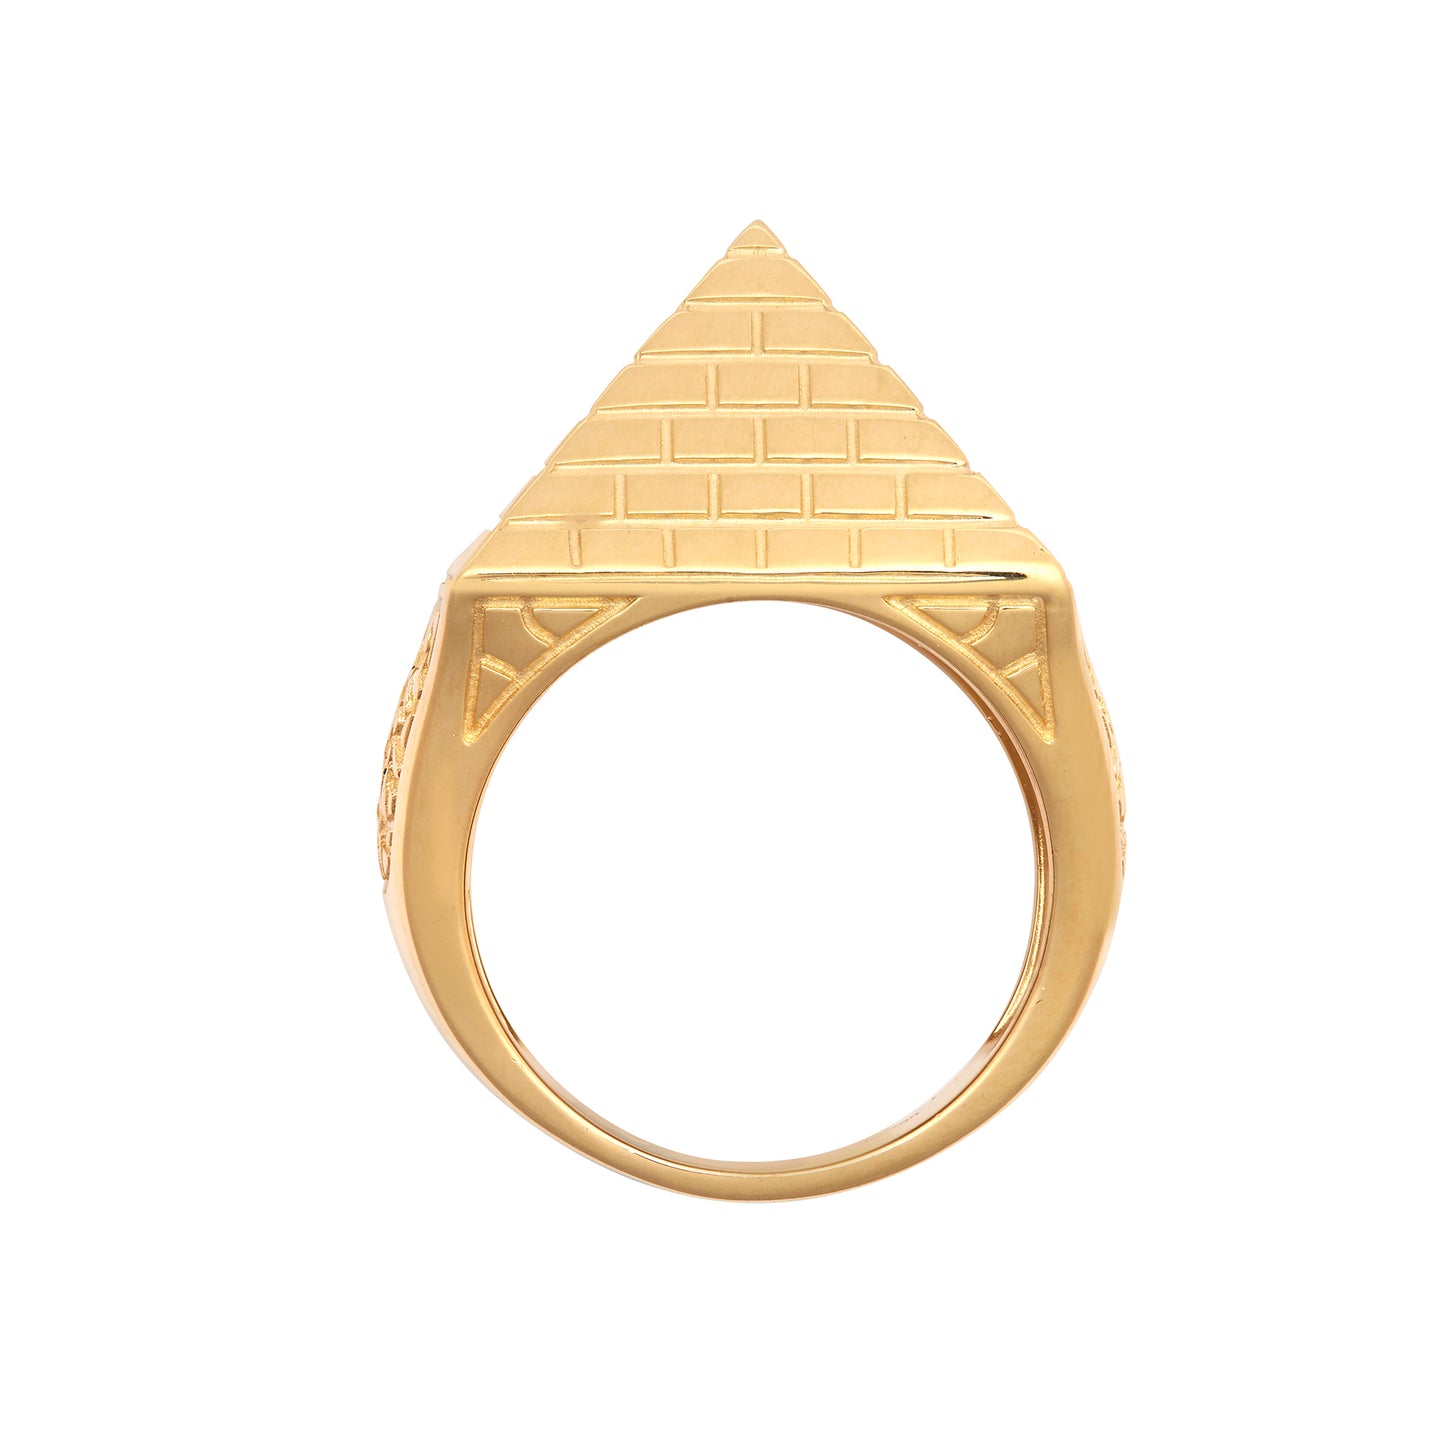 Men's Solid 9ct Gold  Egyptian Pyramid 1oz 25mm Signet Ring - JRN584